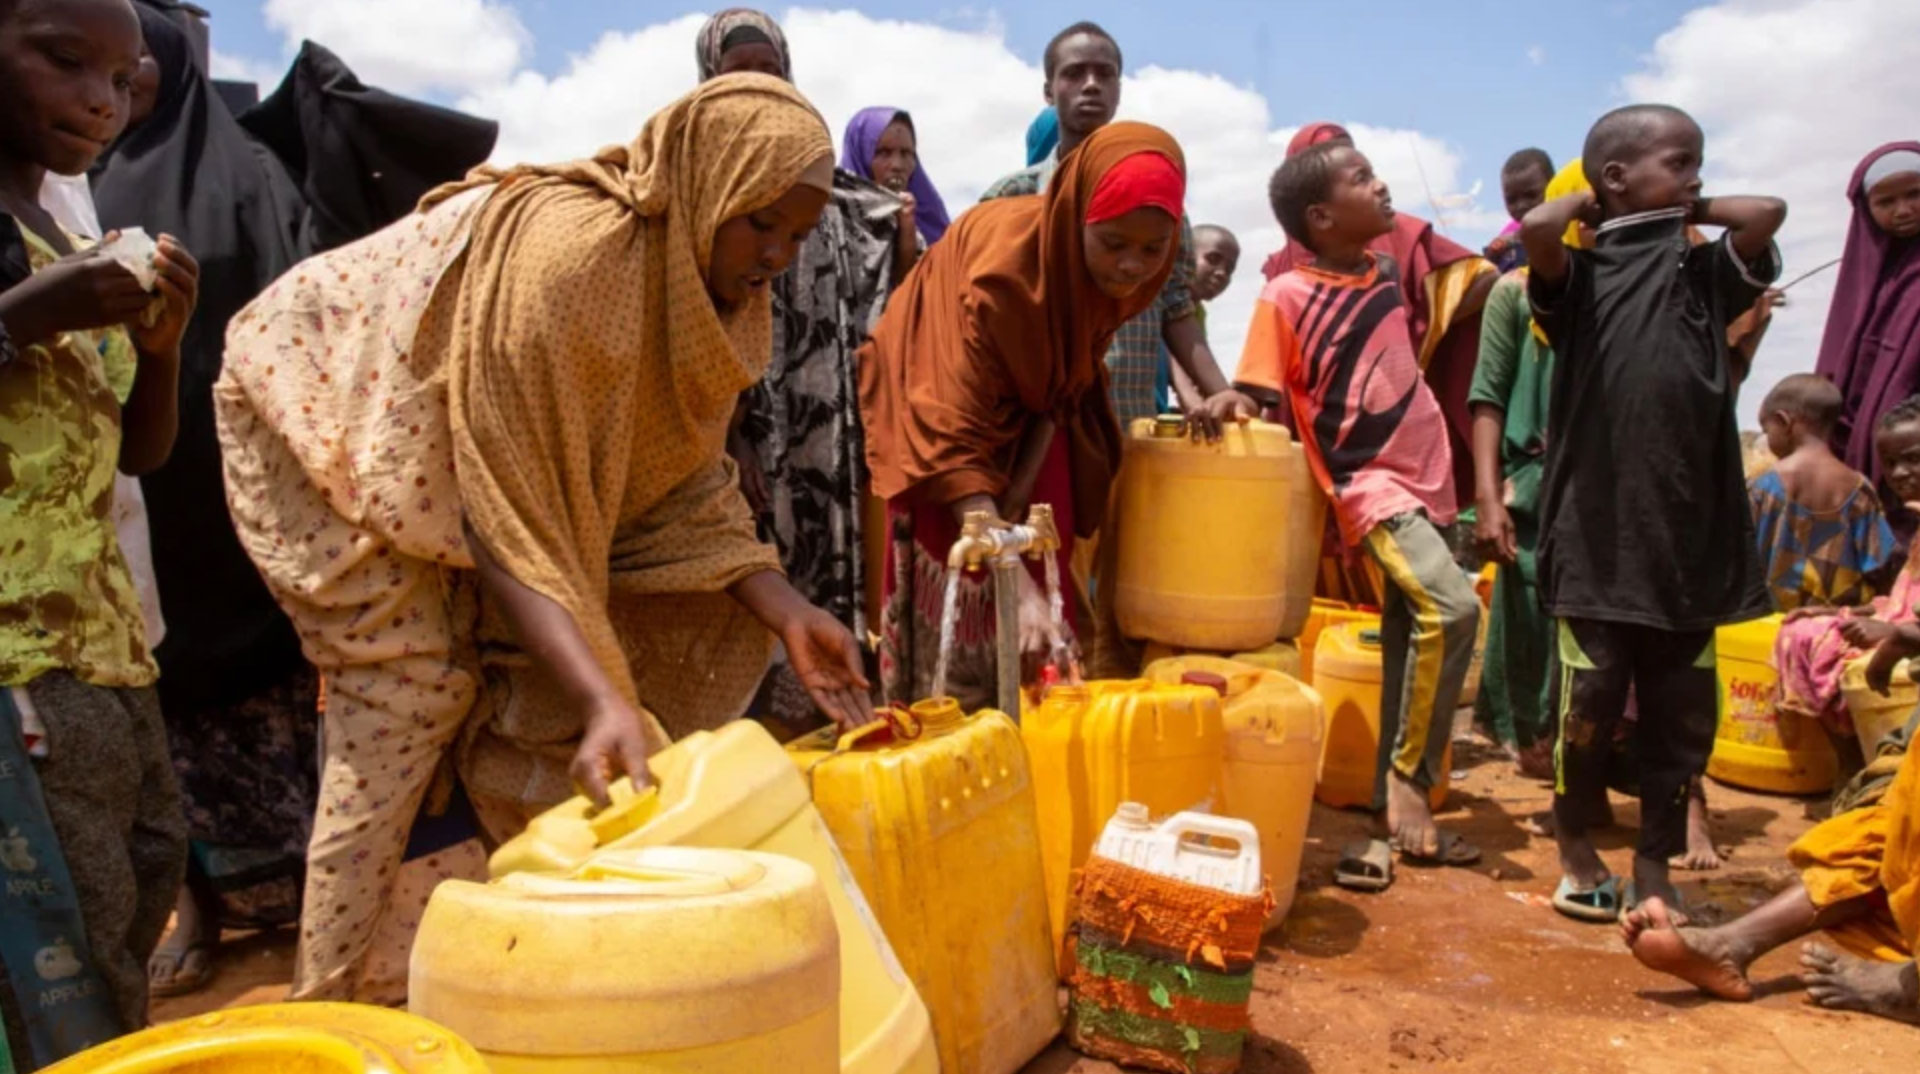 Recently arrived refugees from Somalia line up to collect water from a tank at Dagahaley camp in Dadaab, Kenya. © UNHCR/Charity Nzomo